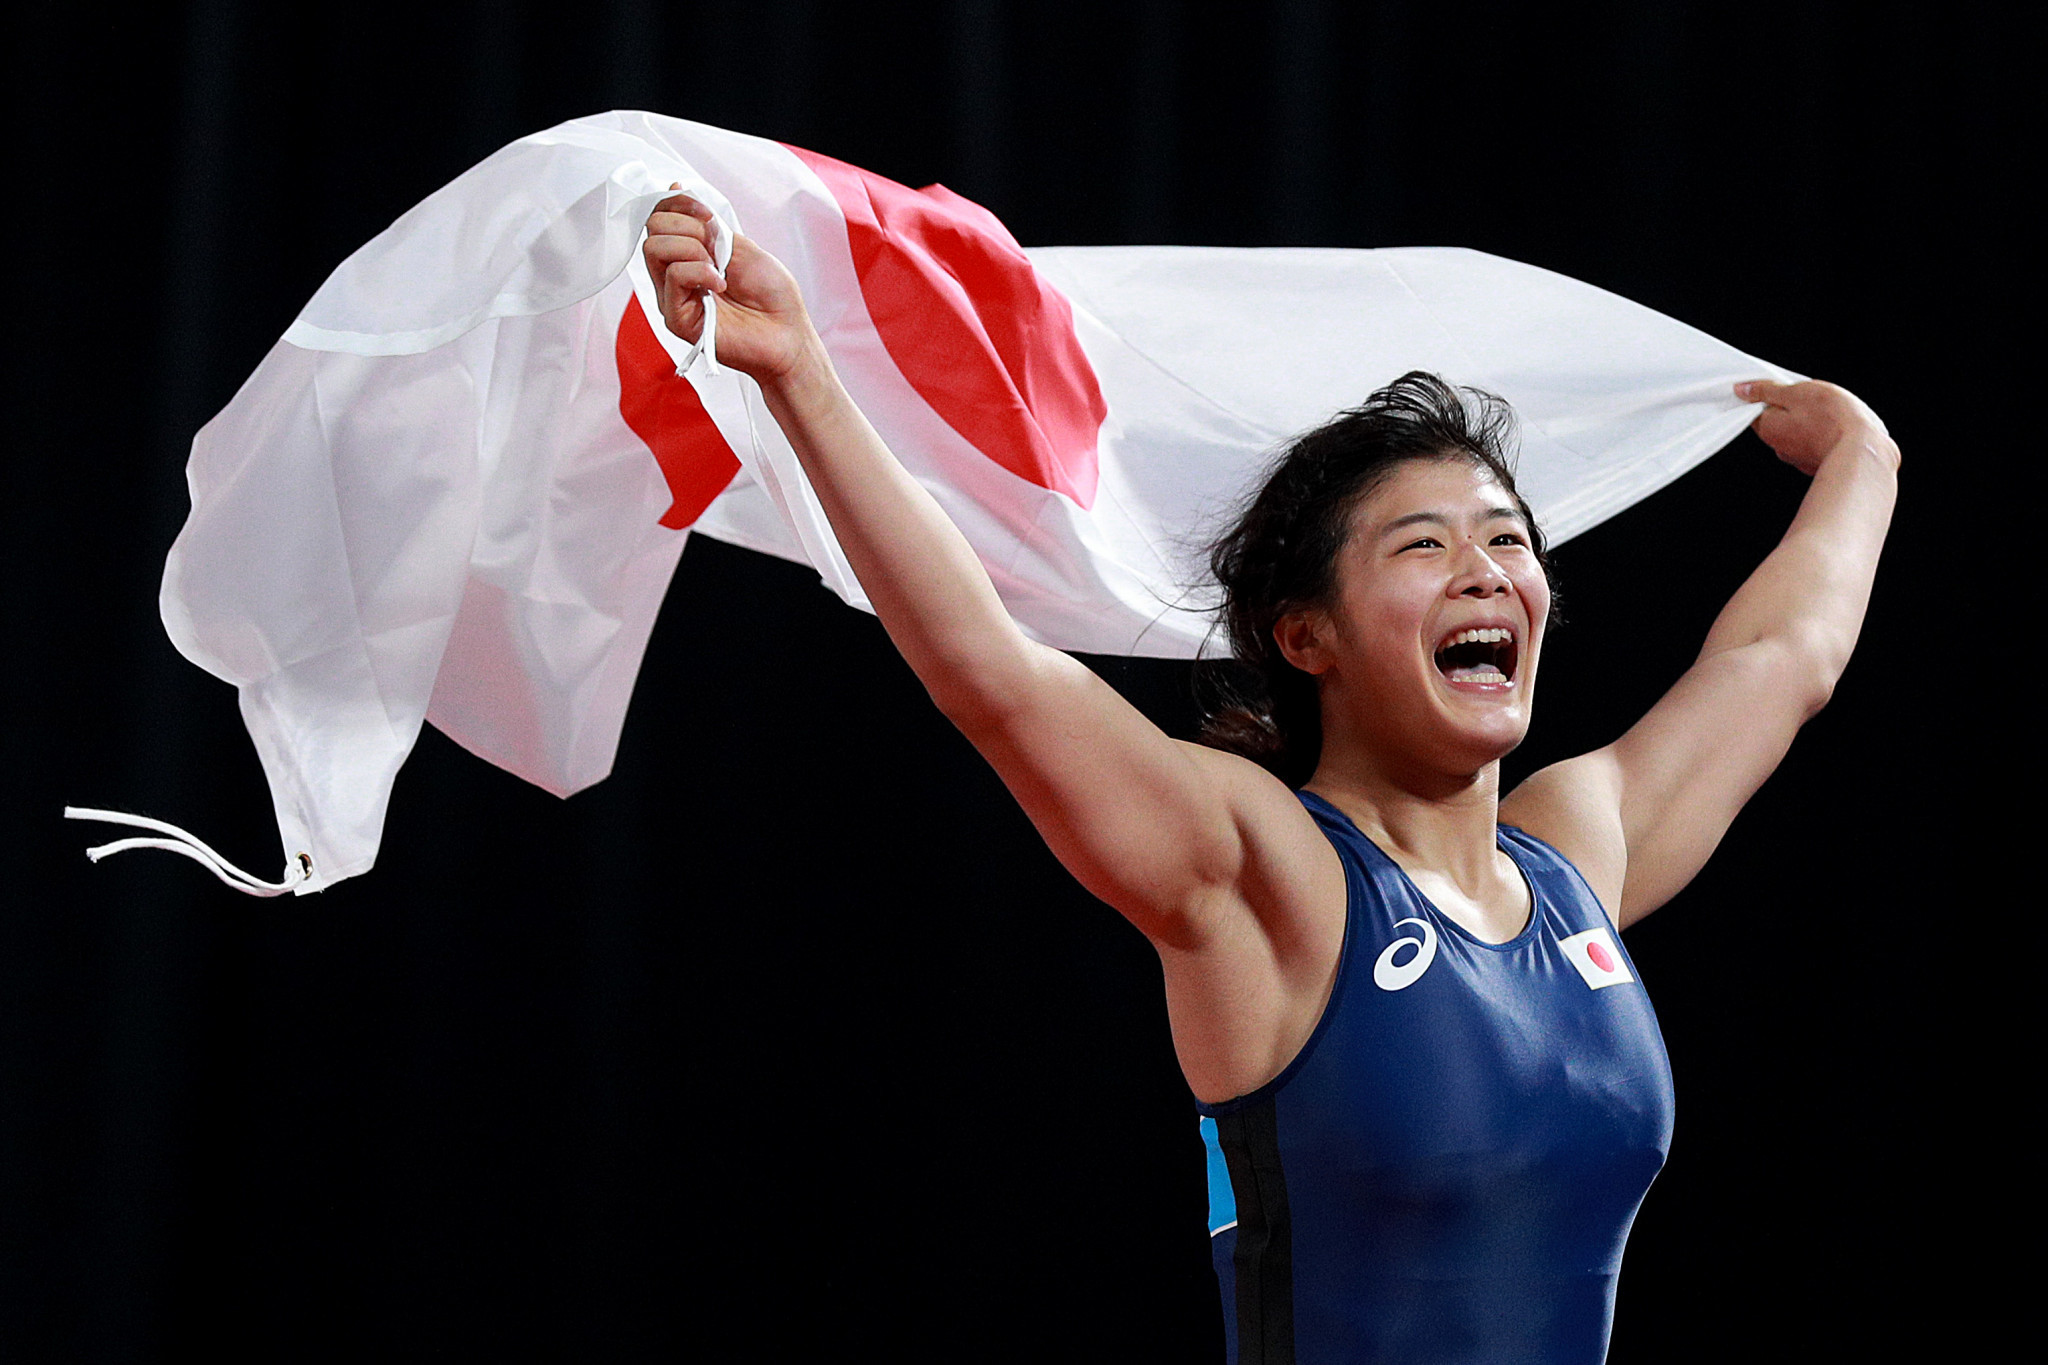 Nonoka Ozaki was the most high-profile winner at the Championships ©Getty Images